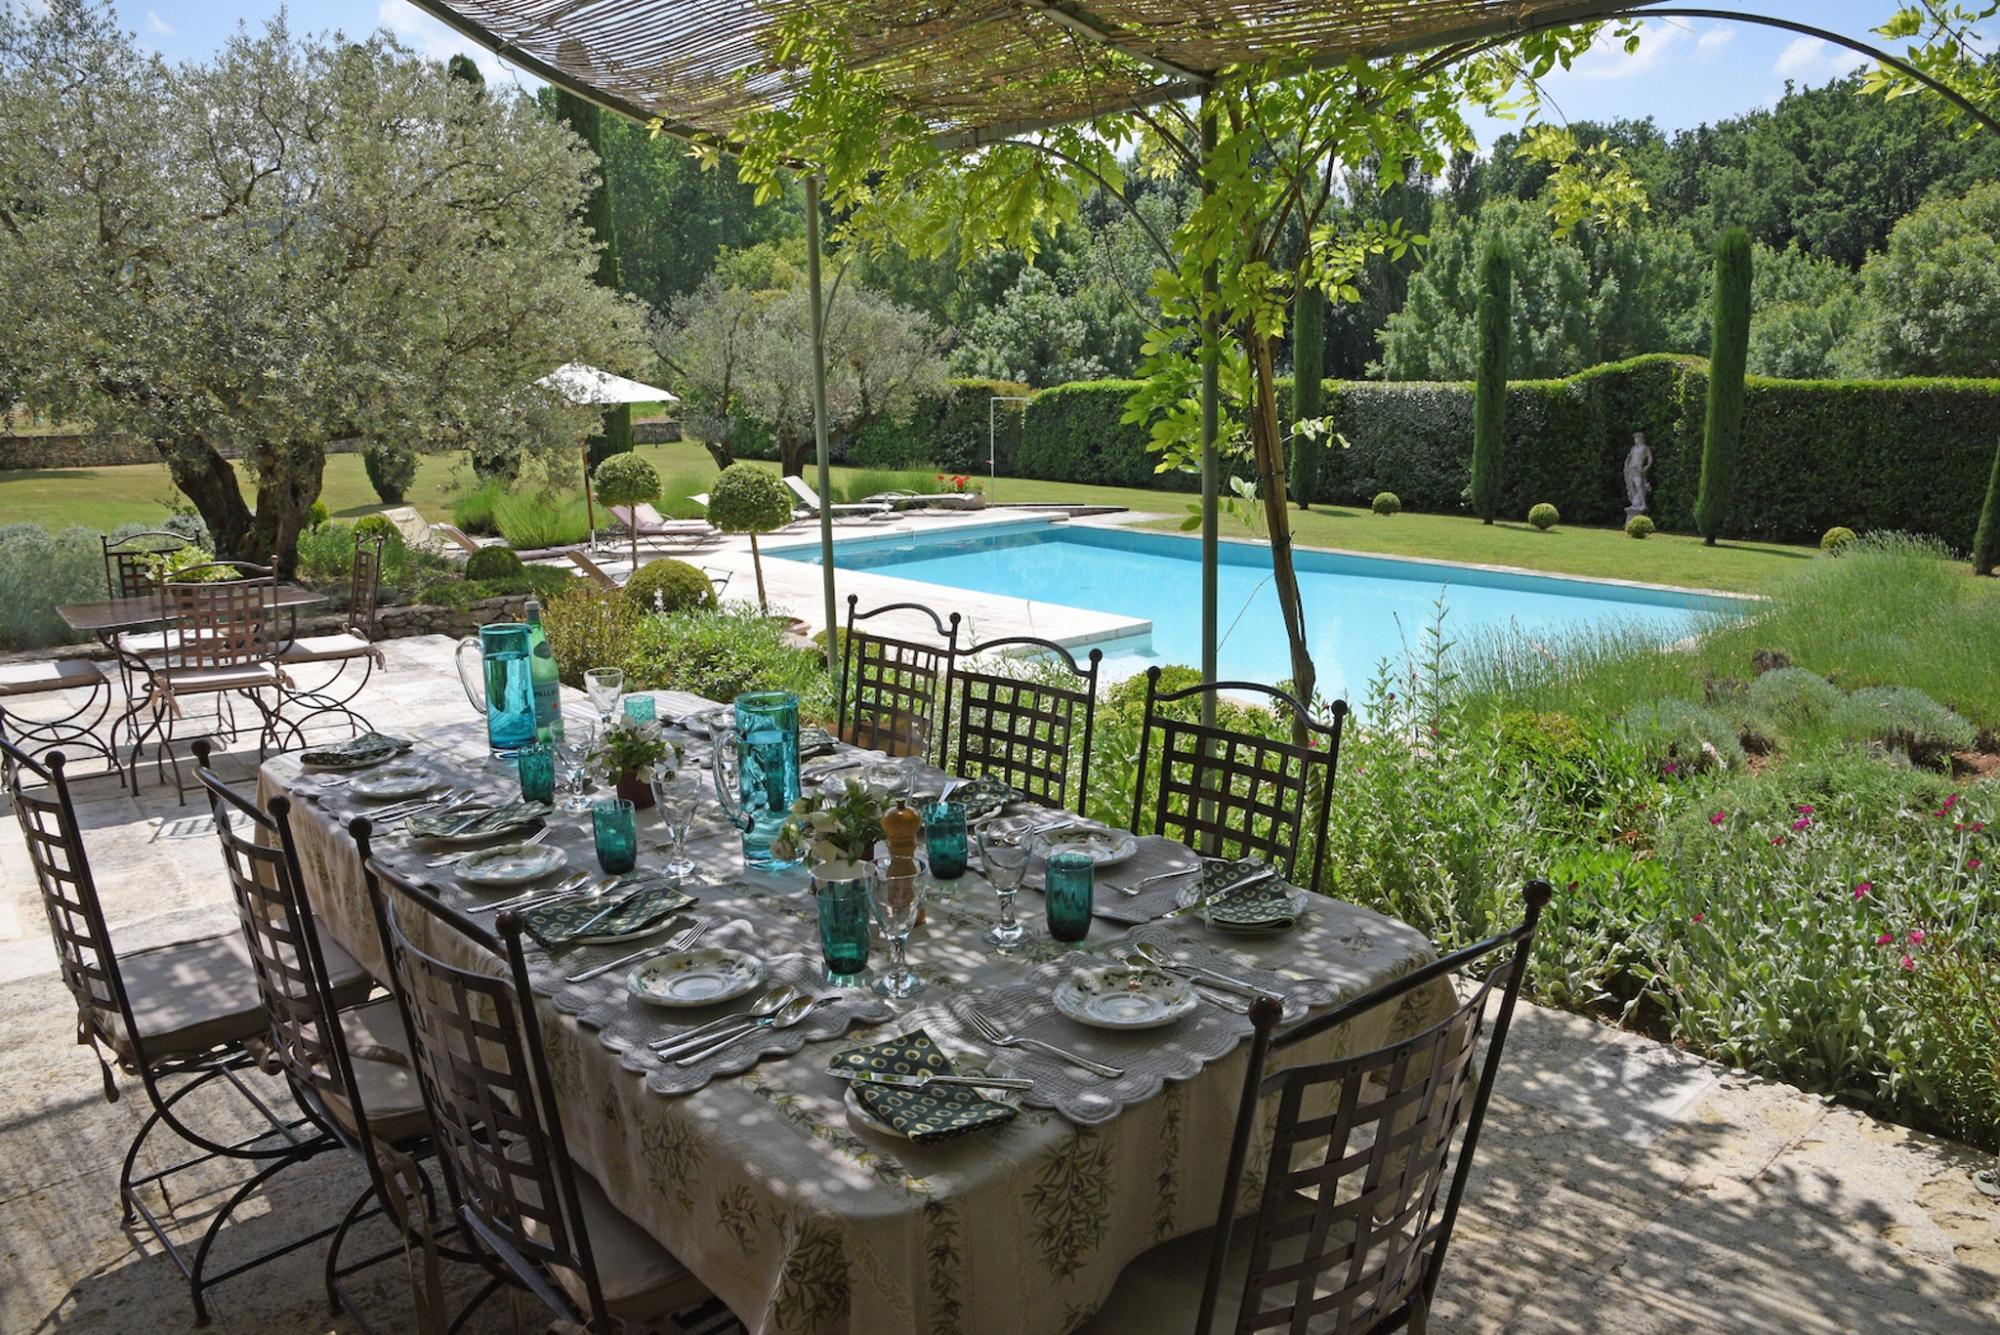 Outdoor dining at Mas des Cerisiers, Provence